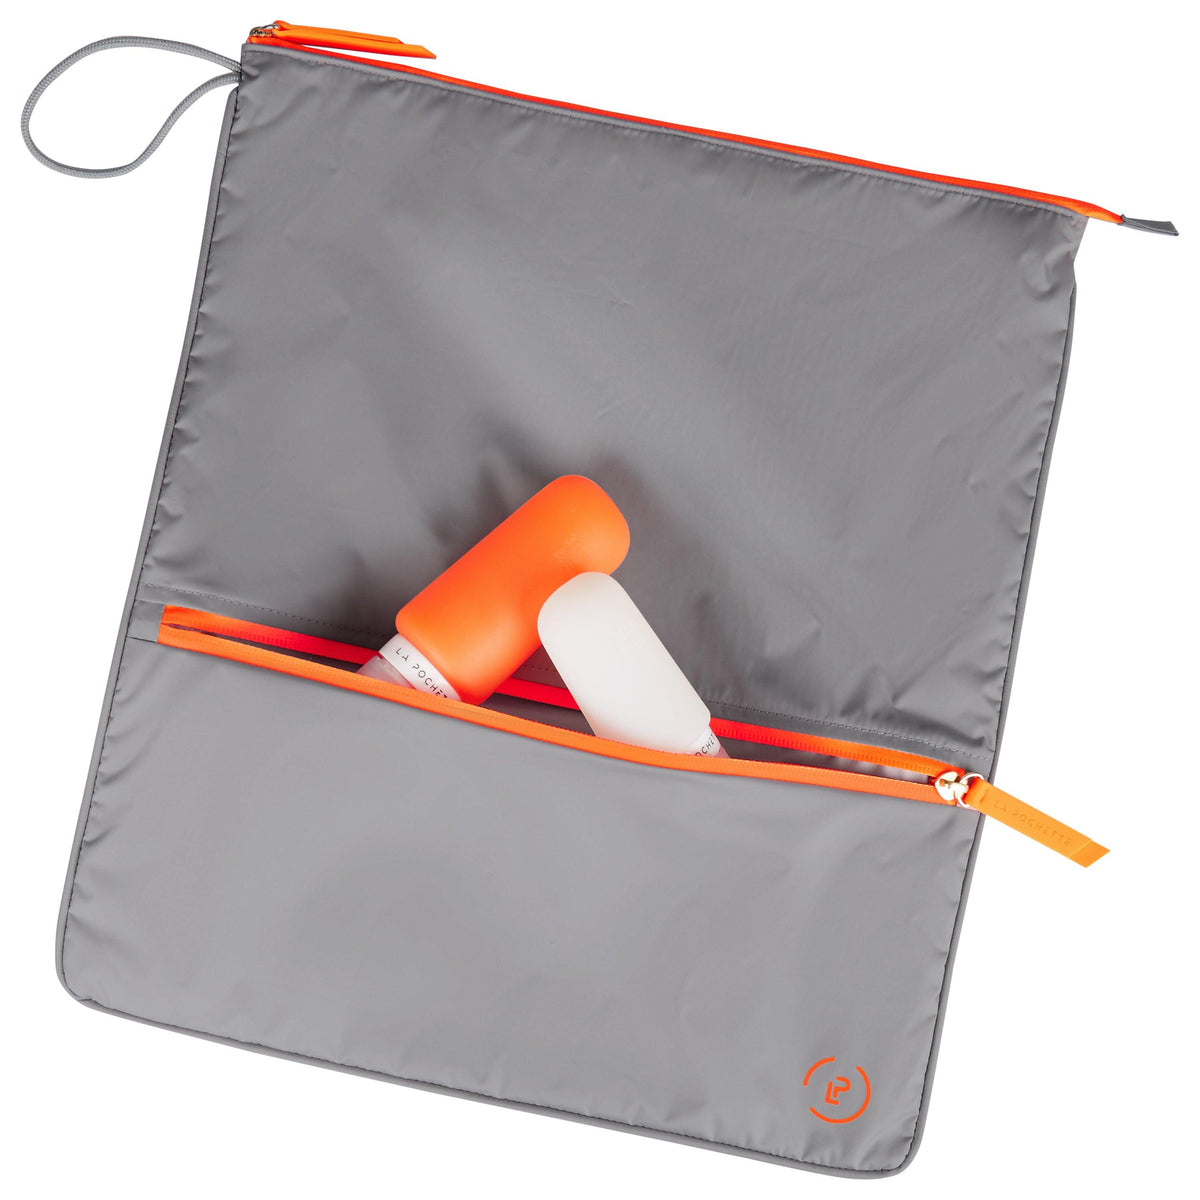 Shadow Neon Orange Sweat Bag, shown flat and with two La Pochette silicone travel bottles resting on top and in front pocket